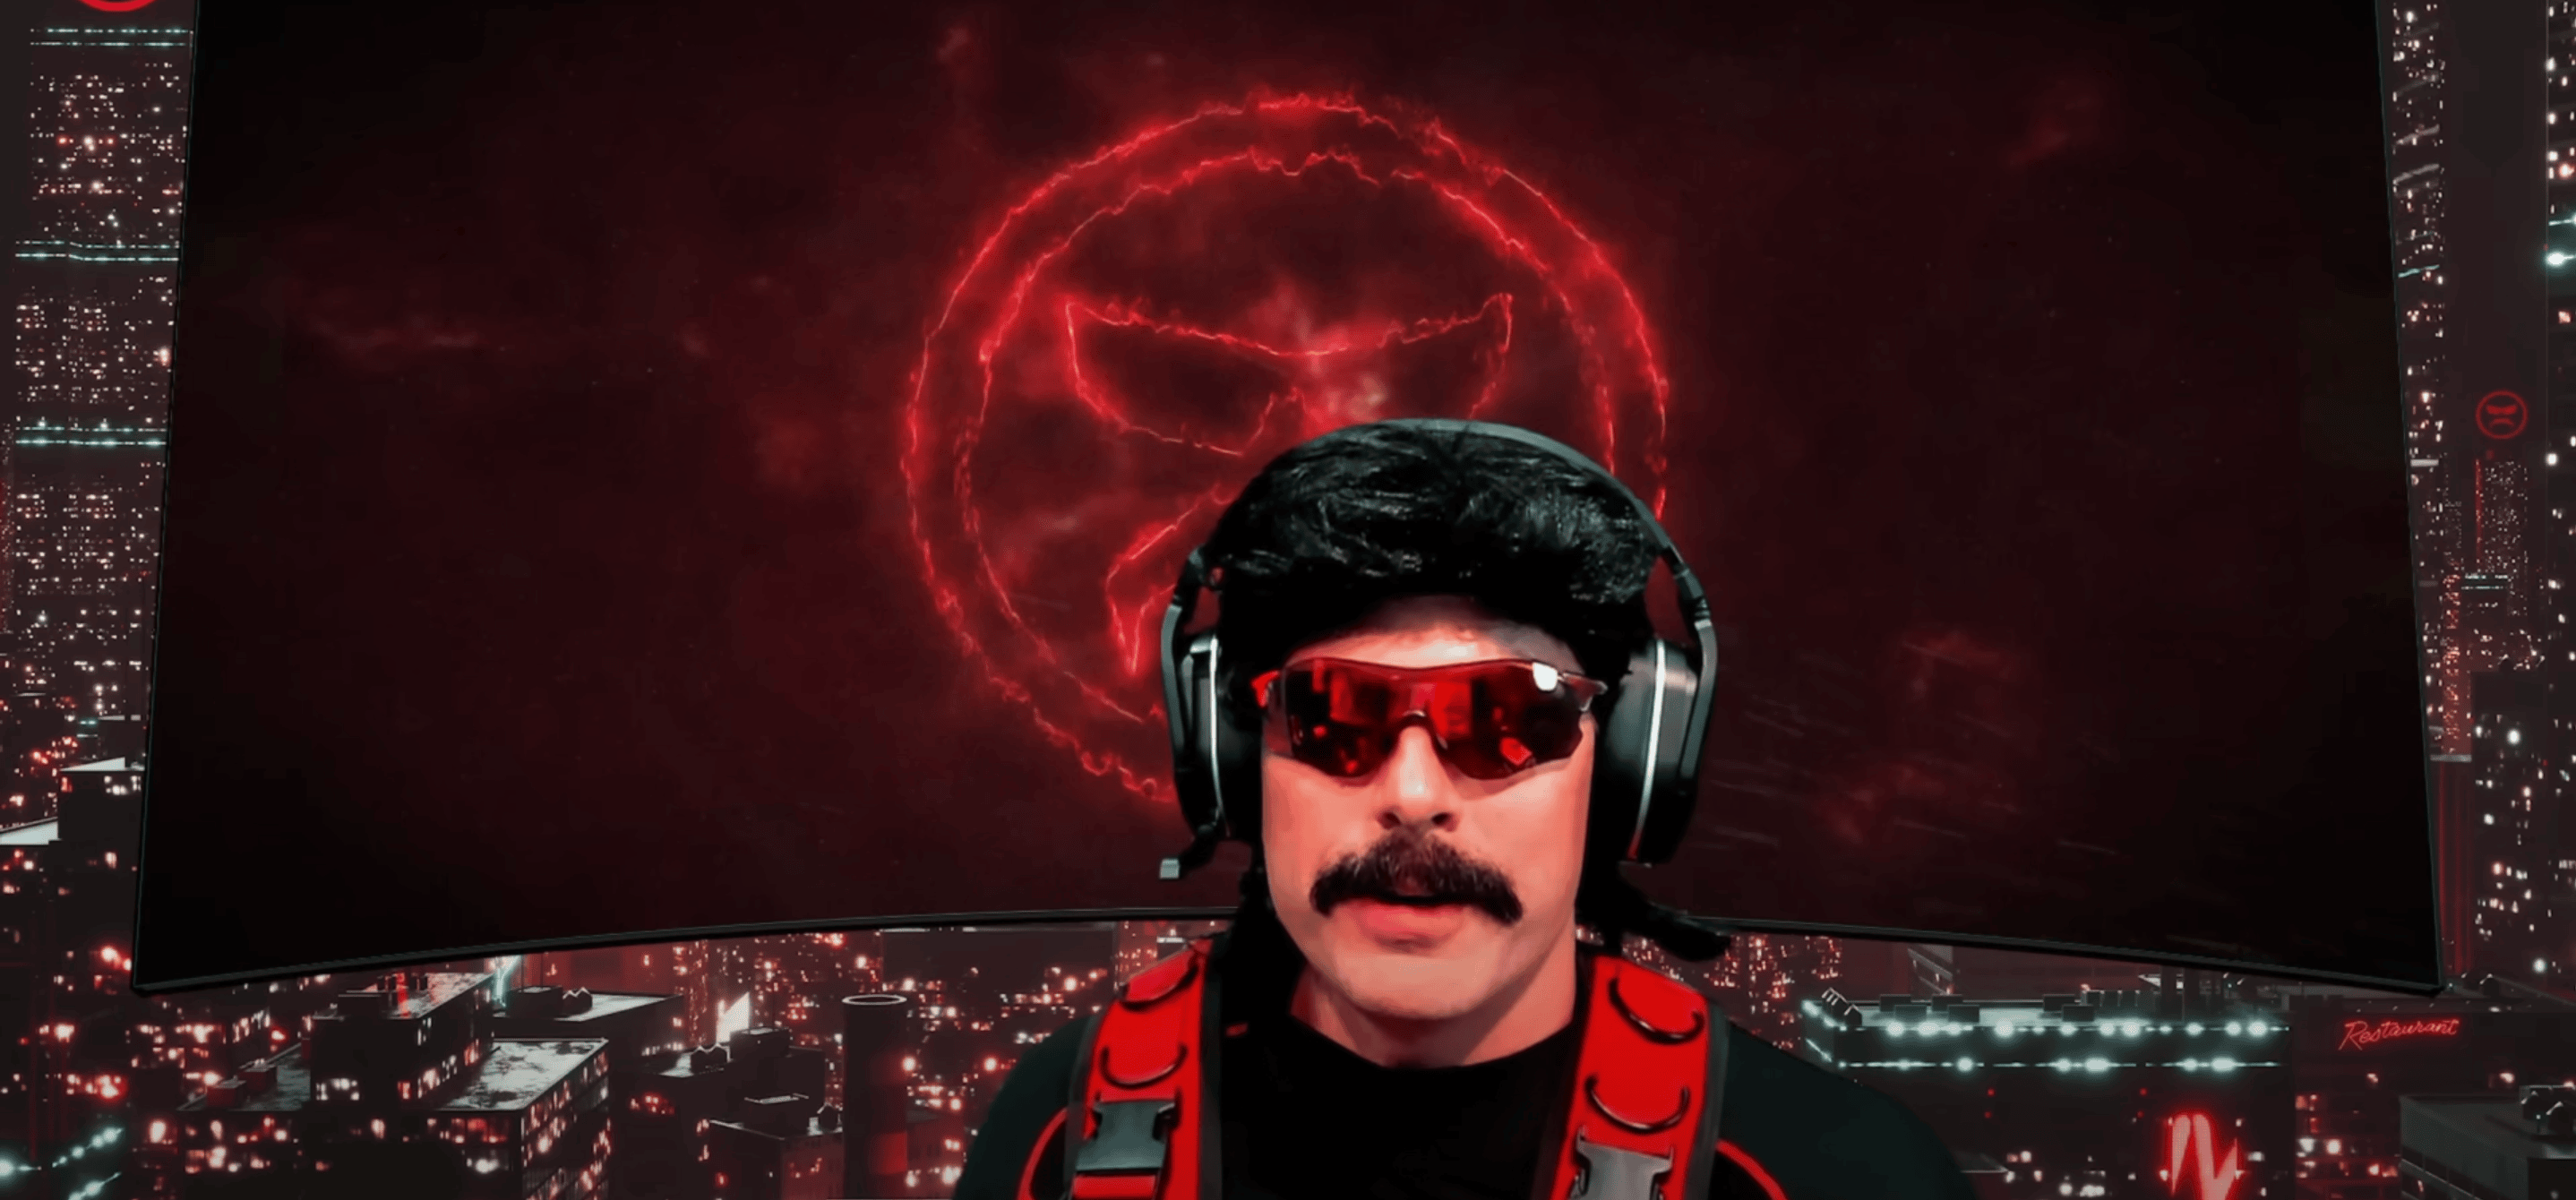 A screenshot of streamer Dr Disrespect: a man with a mustache wearing sunglasses in front of a red background